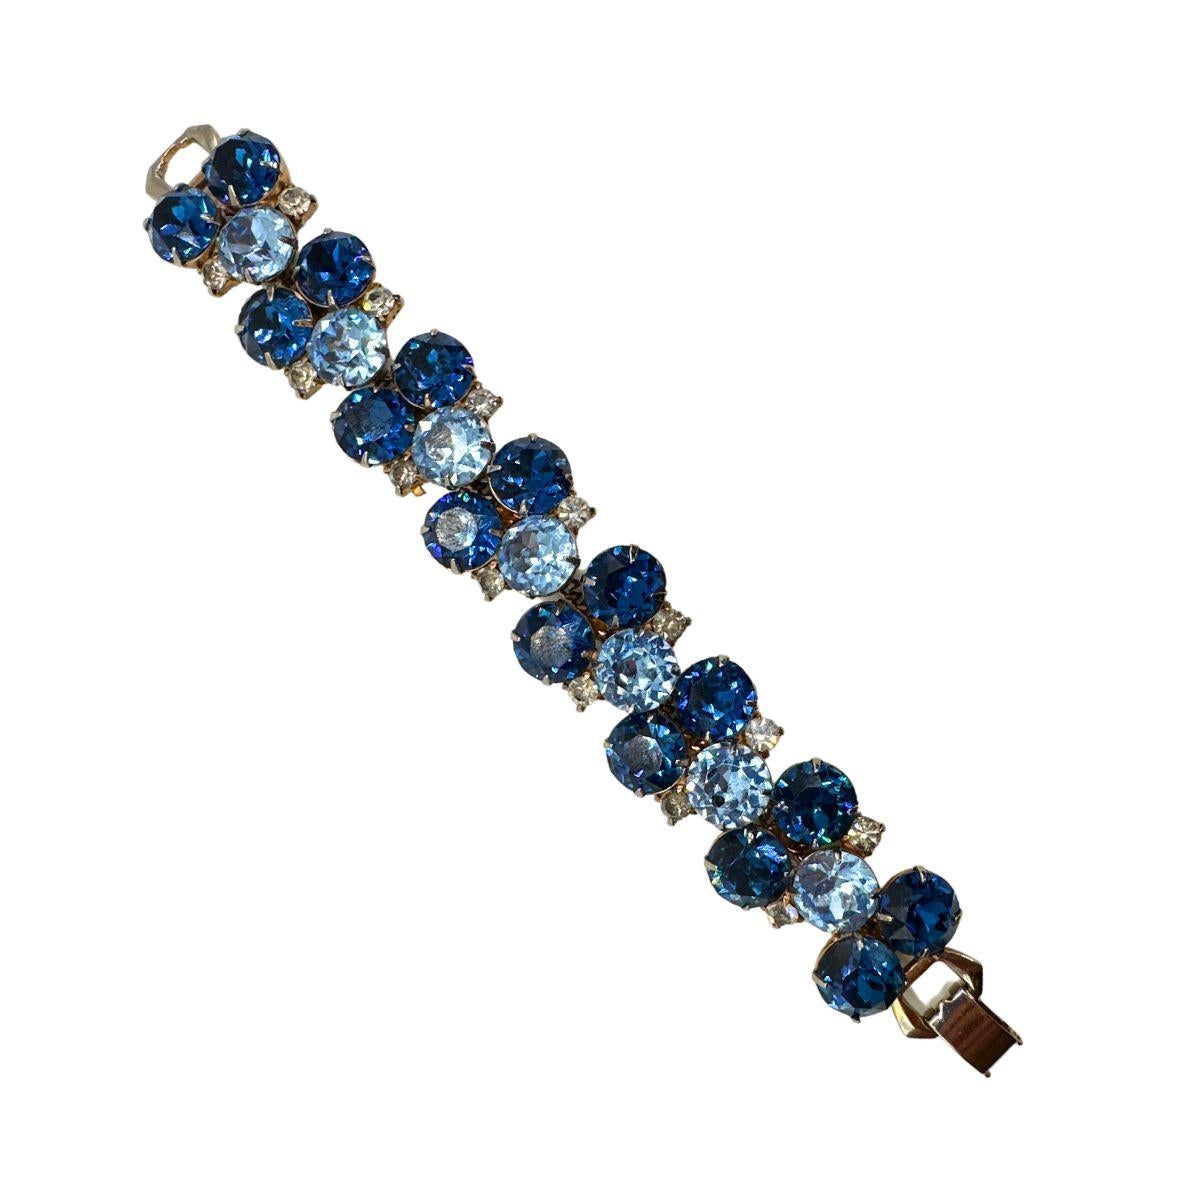 Bracelet Length: 7″

Earring Size:1.23″ X 0.87″

Bin Code: N10 /P13

Step into a world of vintage elegance with this exquisite Hobe Vintage Cobalt Blue and Light Blue Glass Bracelet and Earrings Set. Crafted with meticulous attention to detail, this